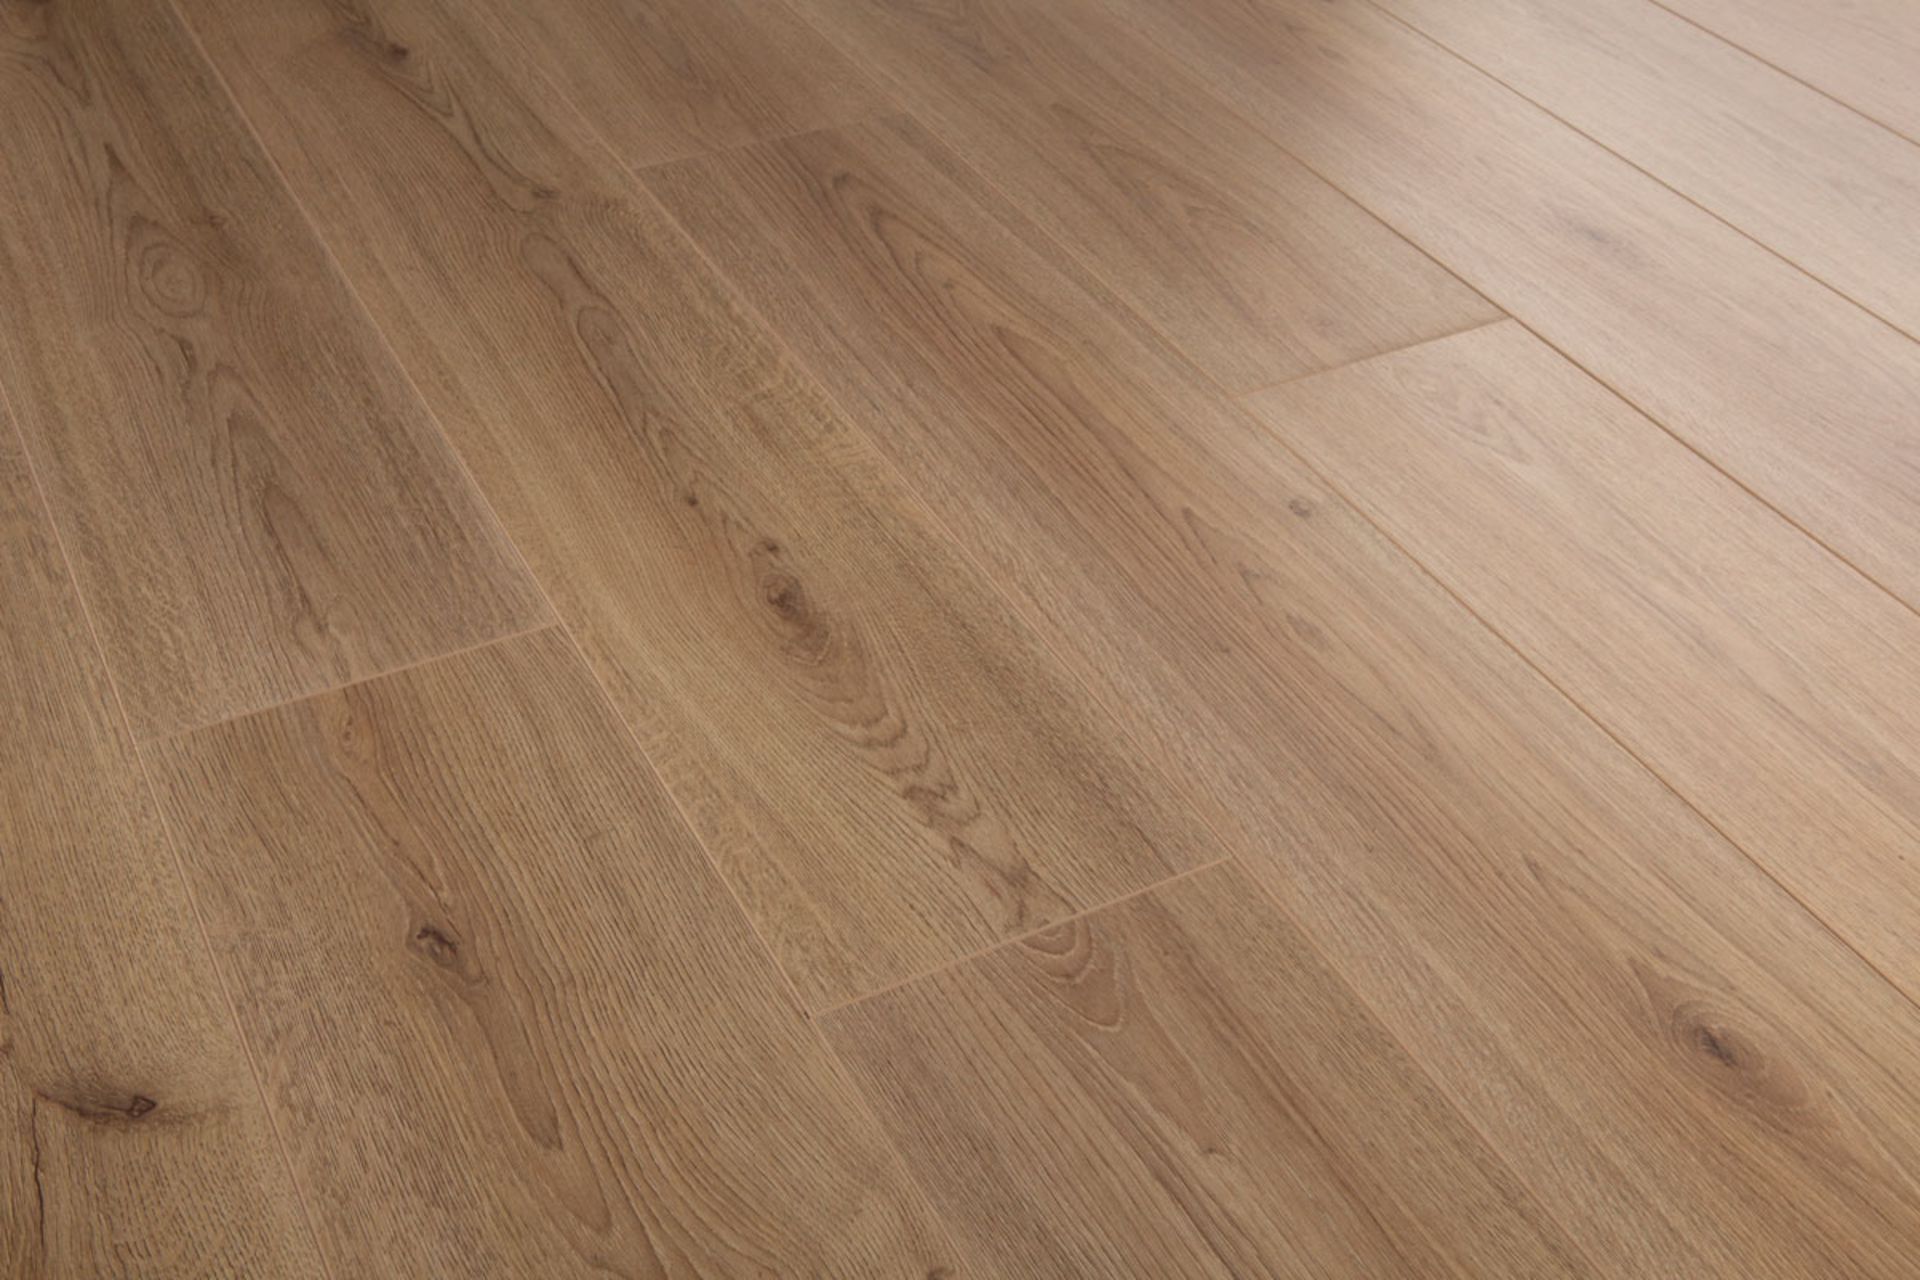 New 9.56M2 Laminate Flooring Trend Nature Oak. With A Warm Natural Tone And A Complex Grain Fea... - Image 2 of 2